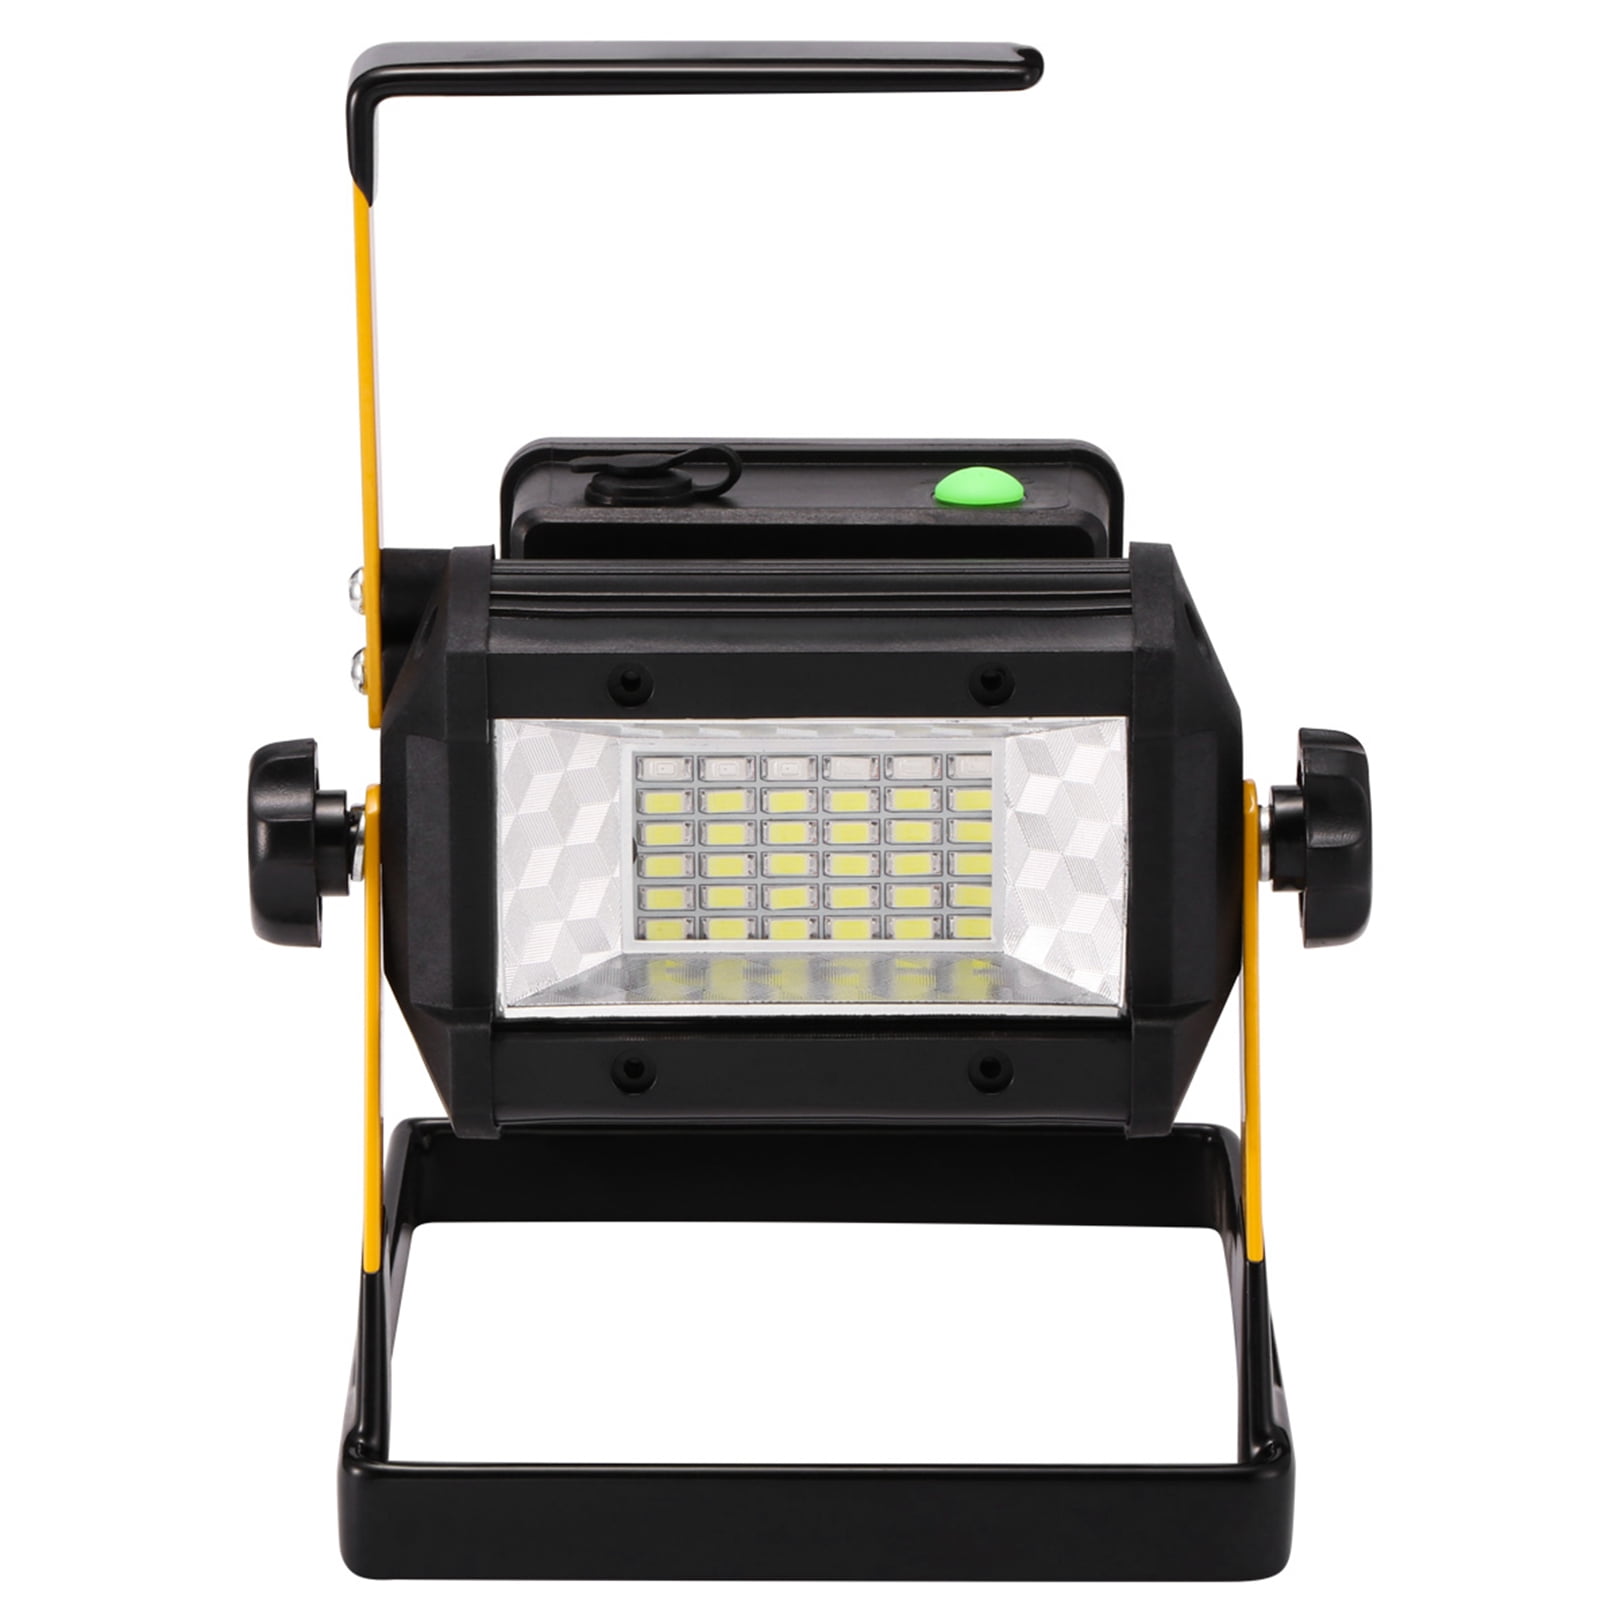 LED Rechargeable Work Light Floodlight Portable Outdoor Security Spot Lamp 50W 